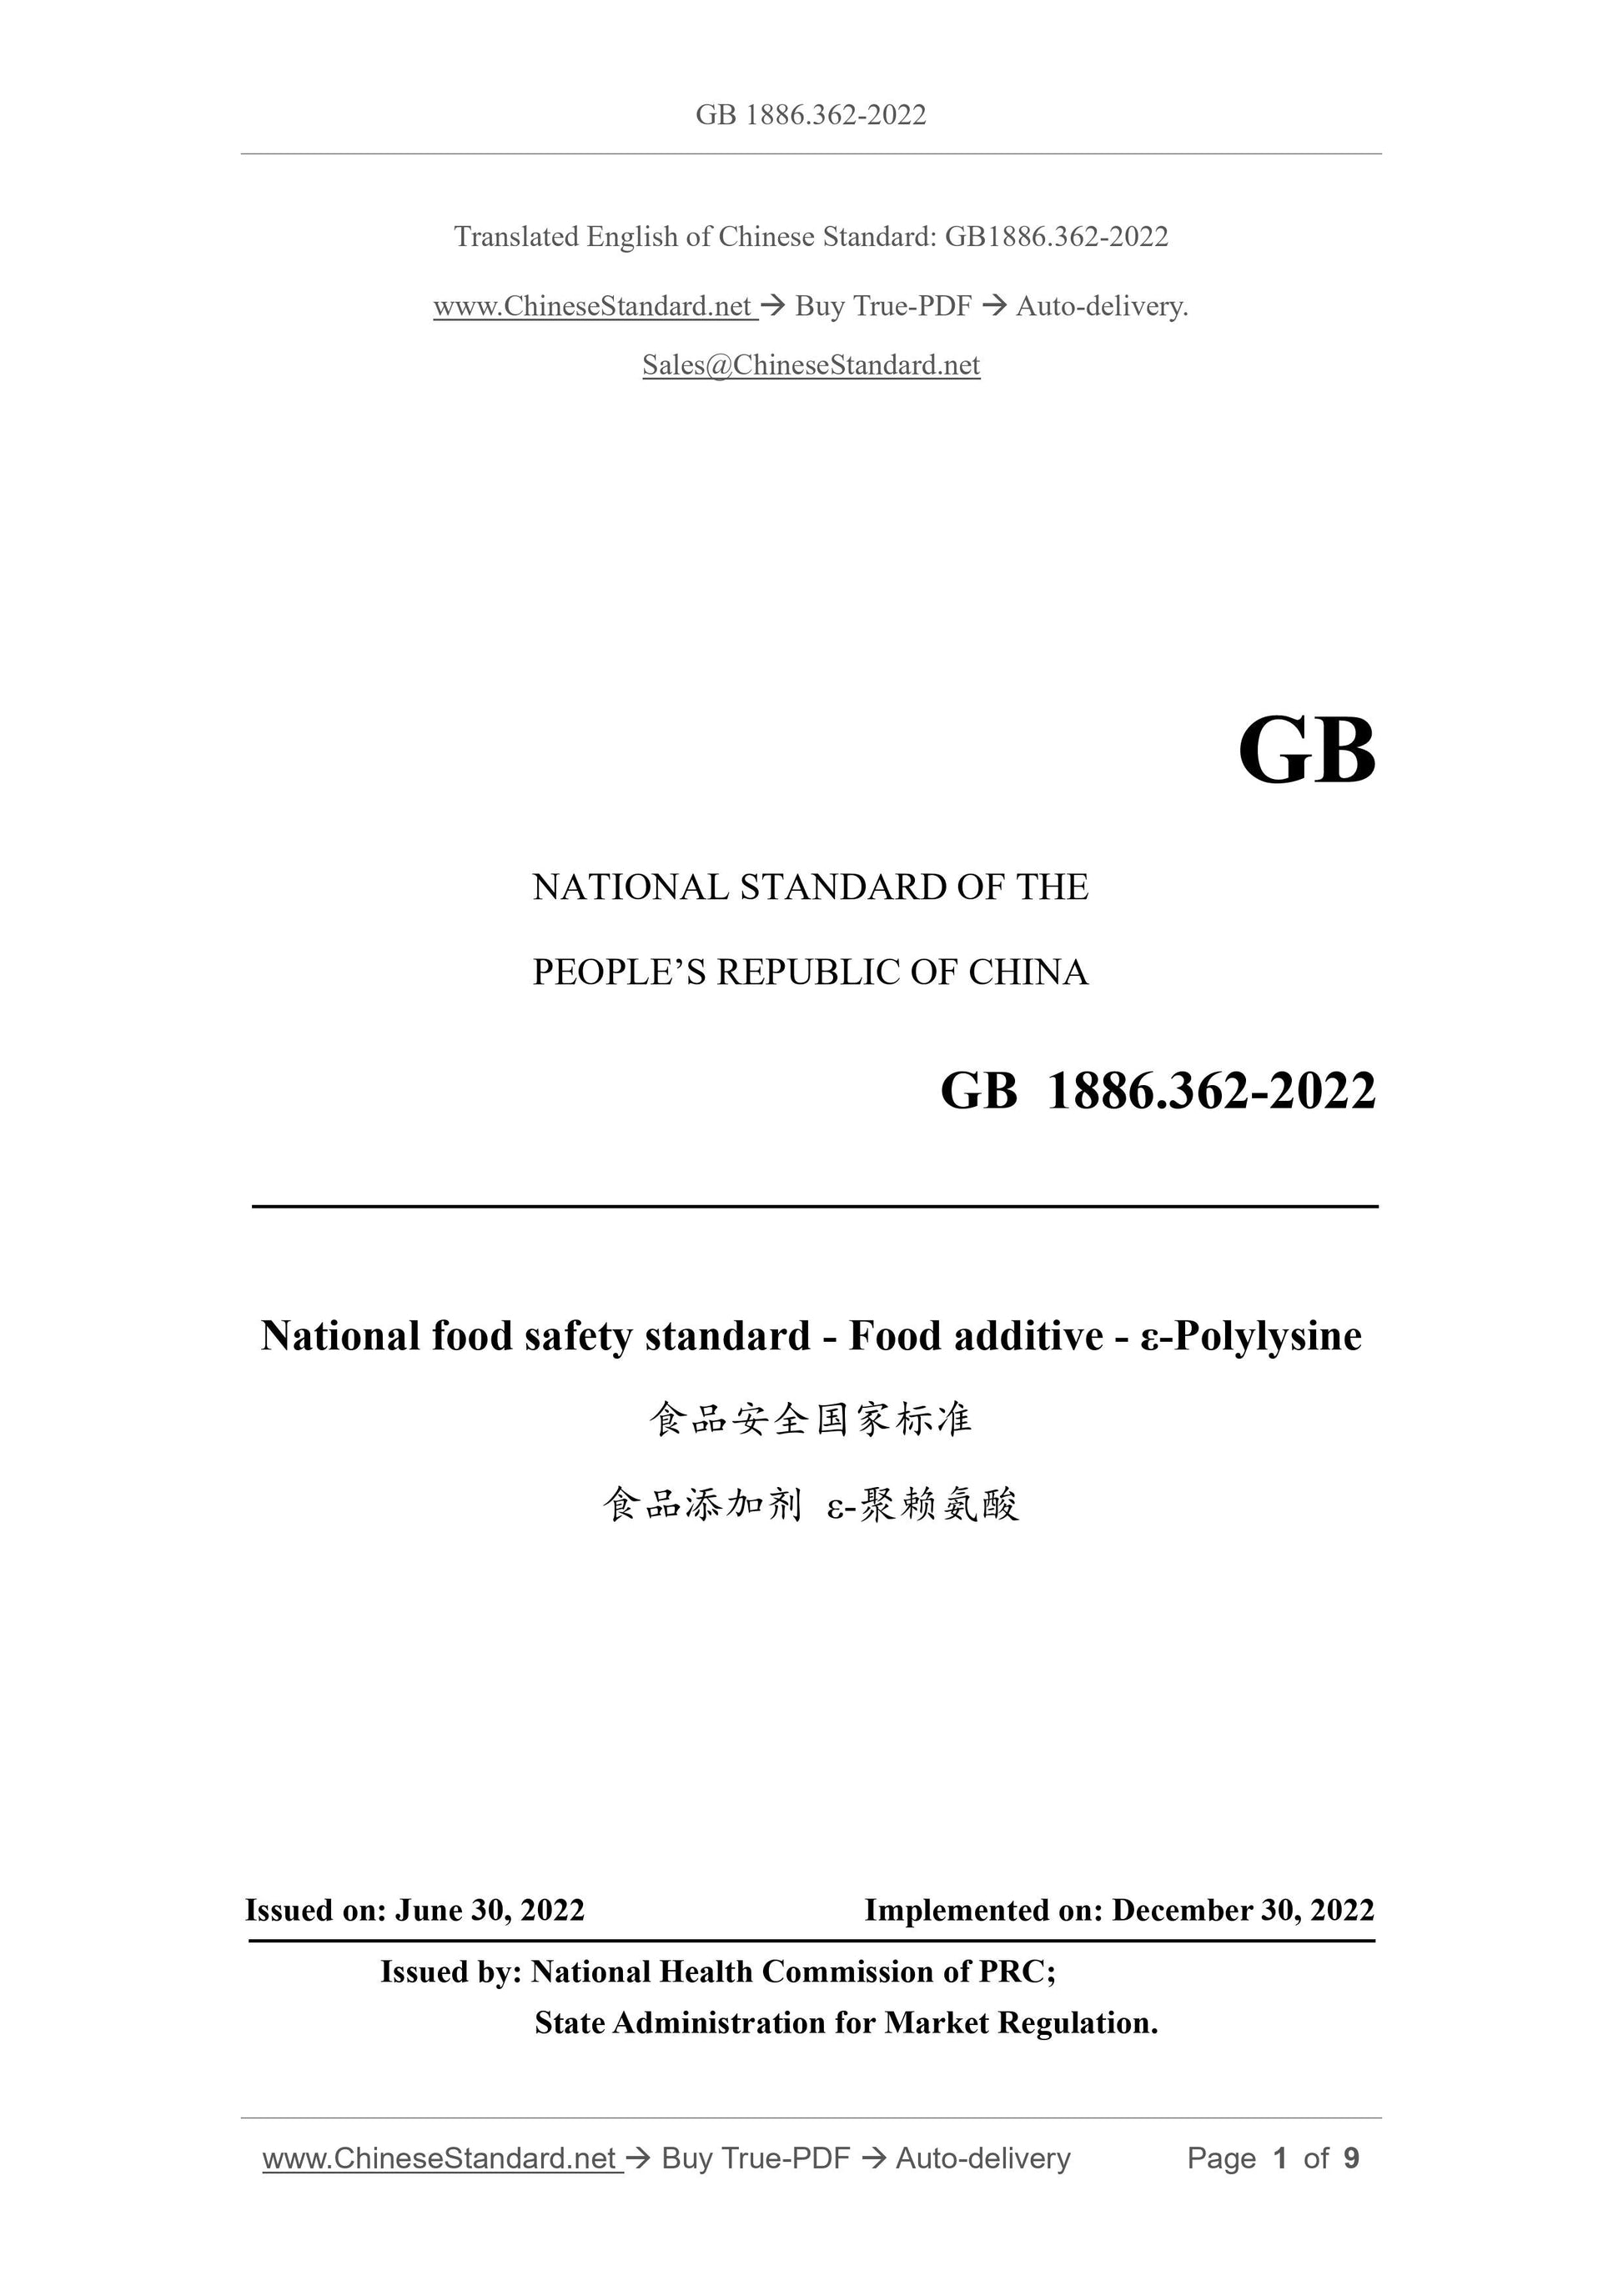 GB 1886.362-2022 Page 1